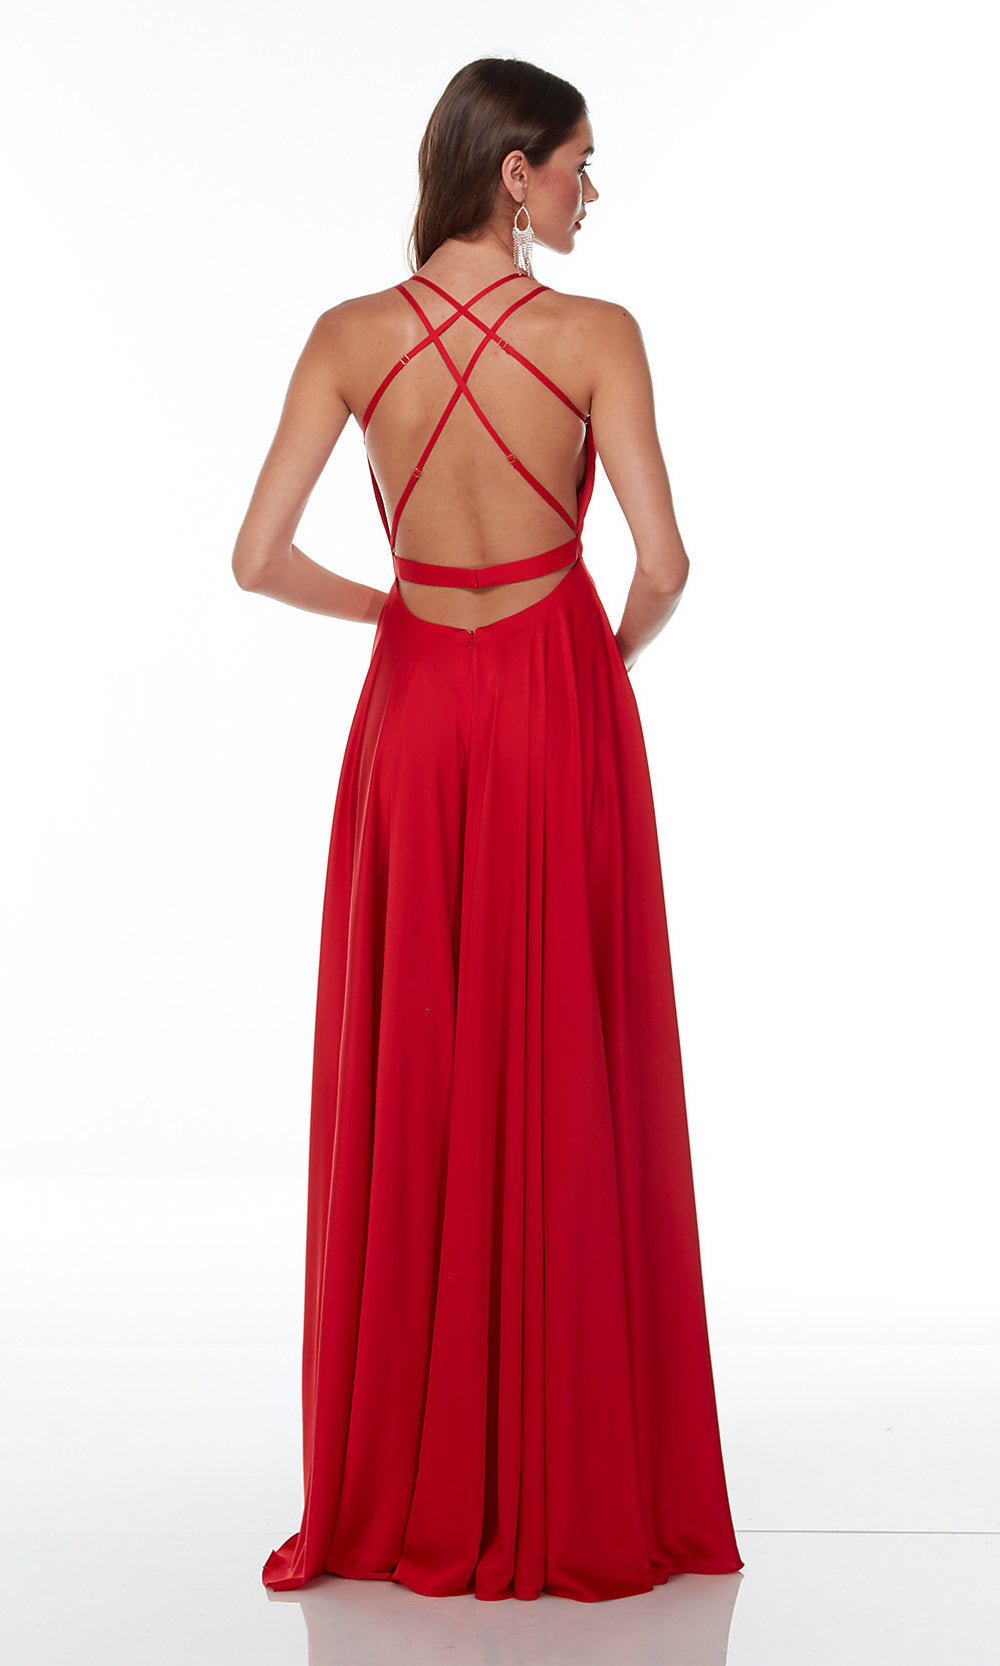 Alyce Strappy-Open-Back Long A-Line Red Prom Dress